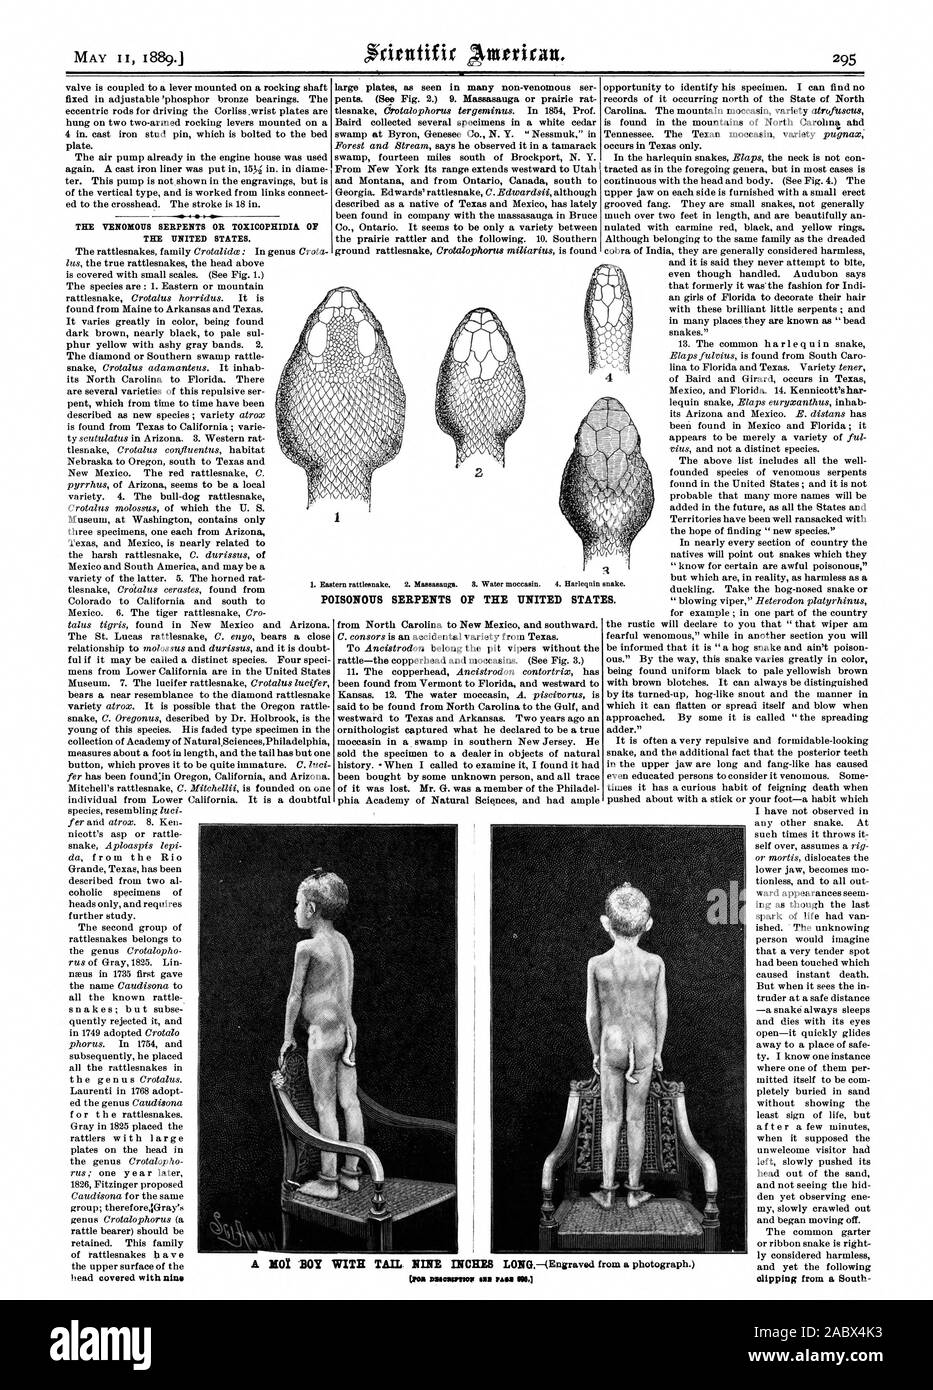 THE UNITED STATES. large plates as seen in many non-venomous ser pents. (See Fig. 2.) 9. Massasauga or prairie rat POISONOUS SERPENTS OF THE UNITED STATES., scientific american, 1889-05-11 Stock Photo